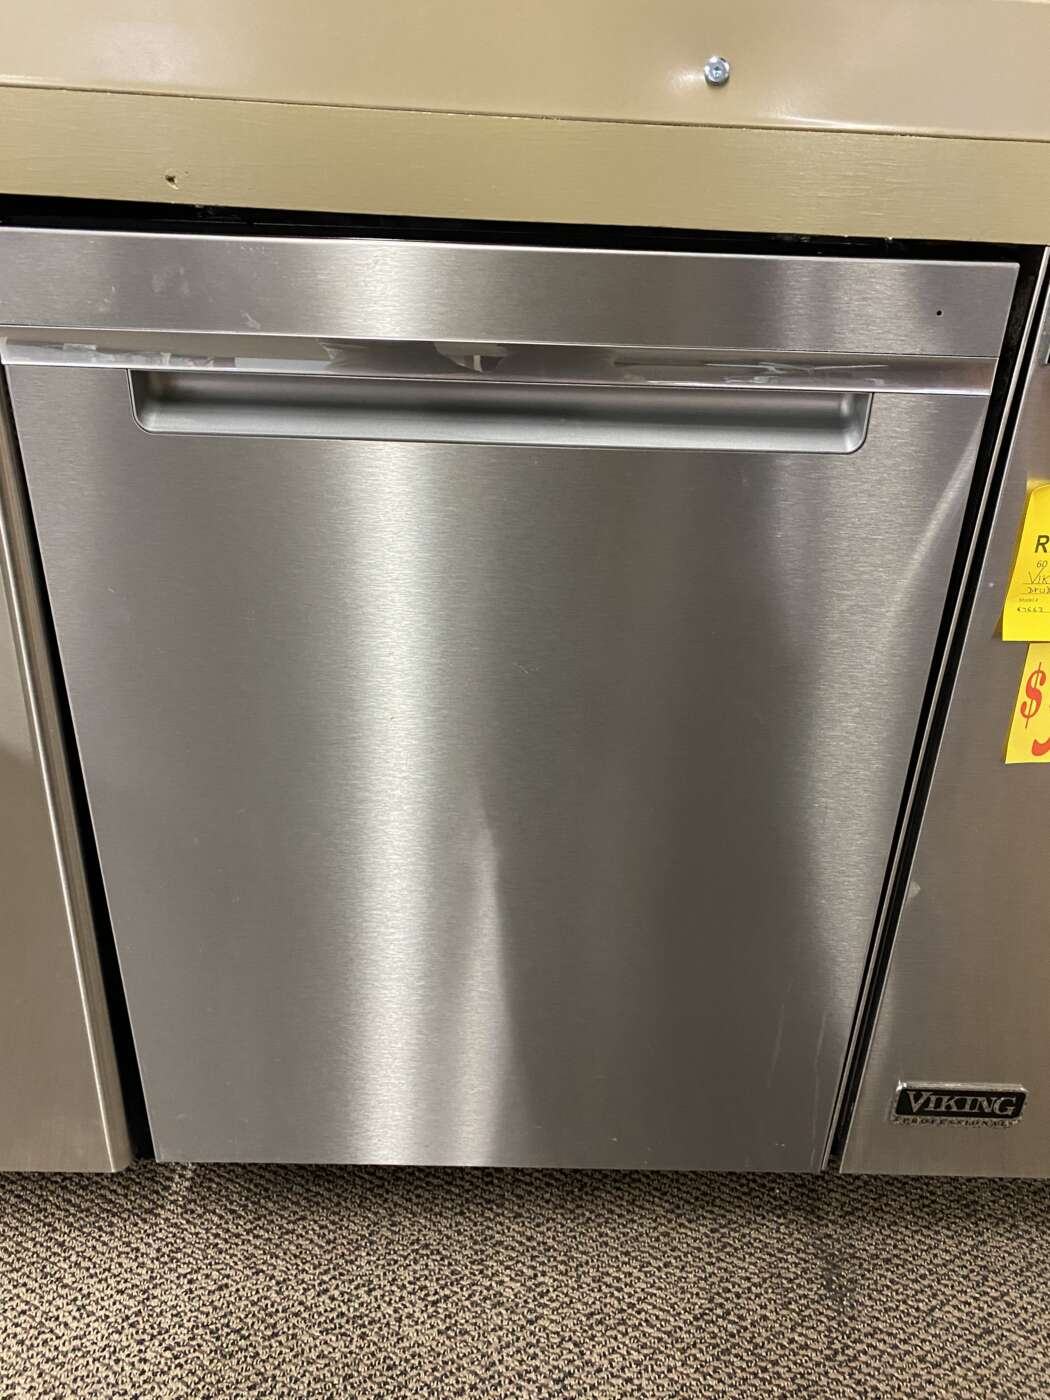 Reconditioned WHIRLPOOL Stainless-Tub Built-In Dishwasher – Stainless